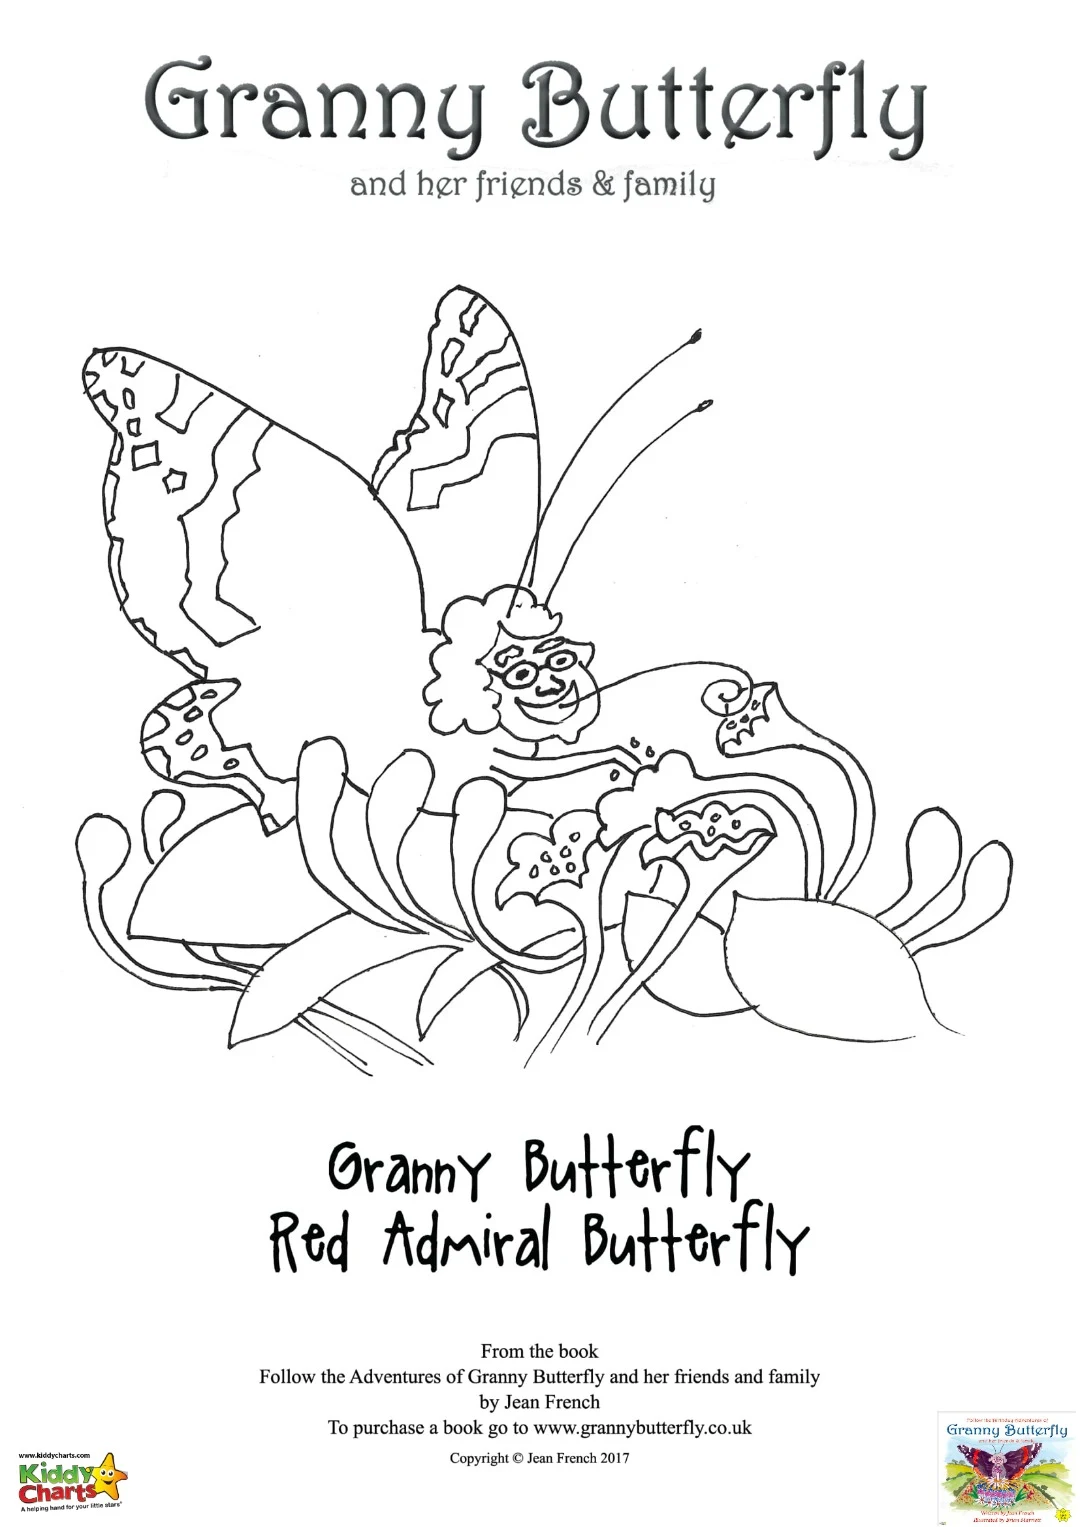 Granny Butterfly Colouring pages: Granny Butterfly herself!